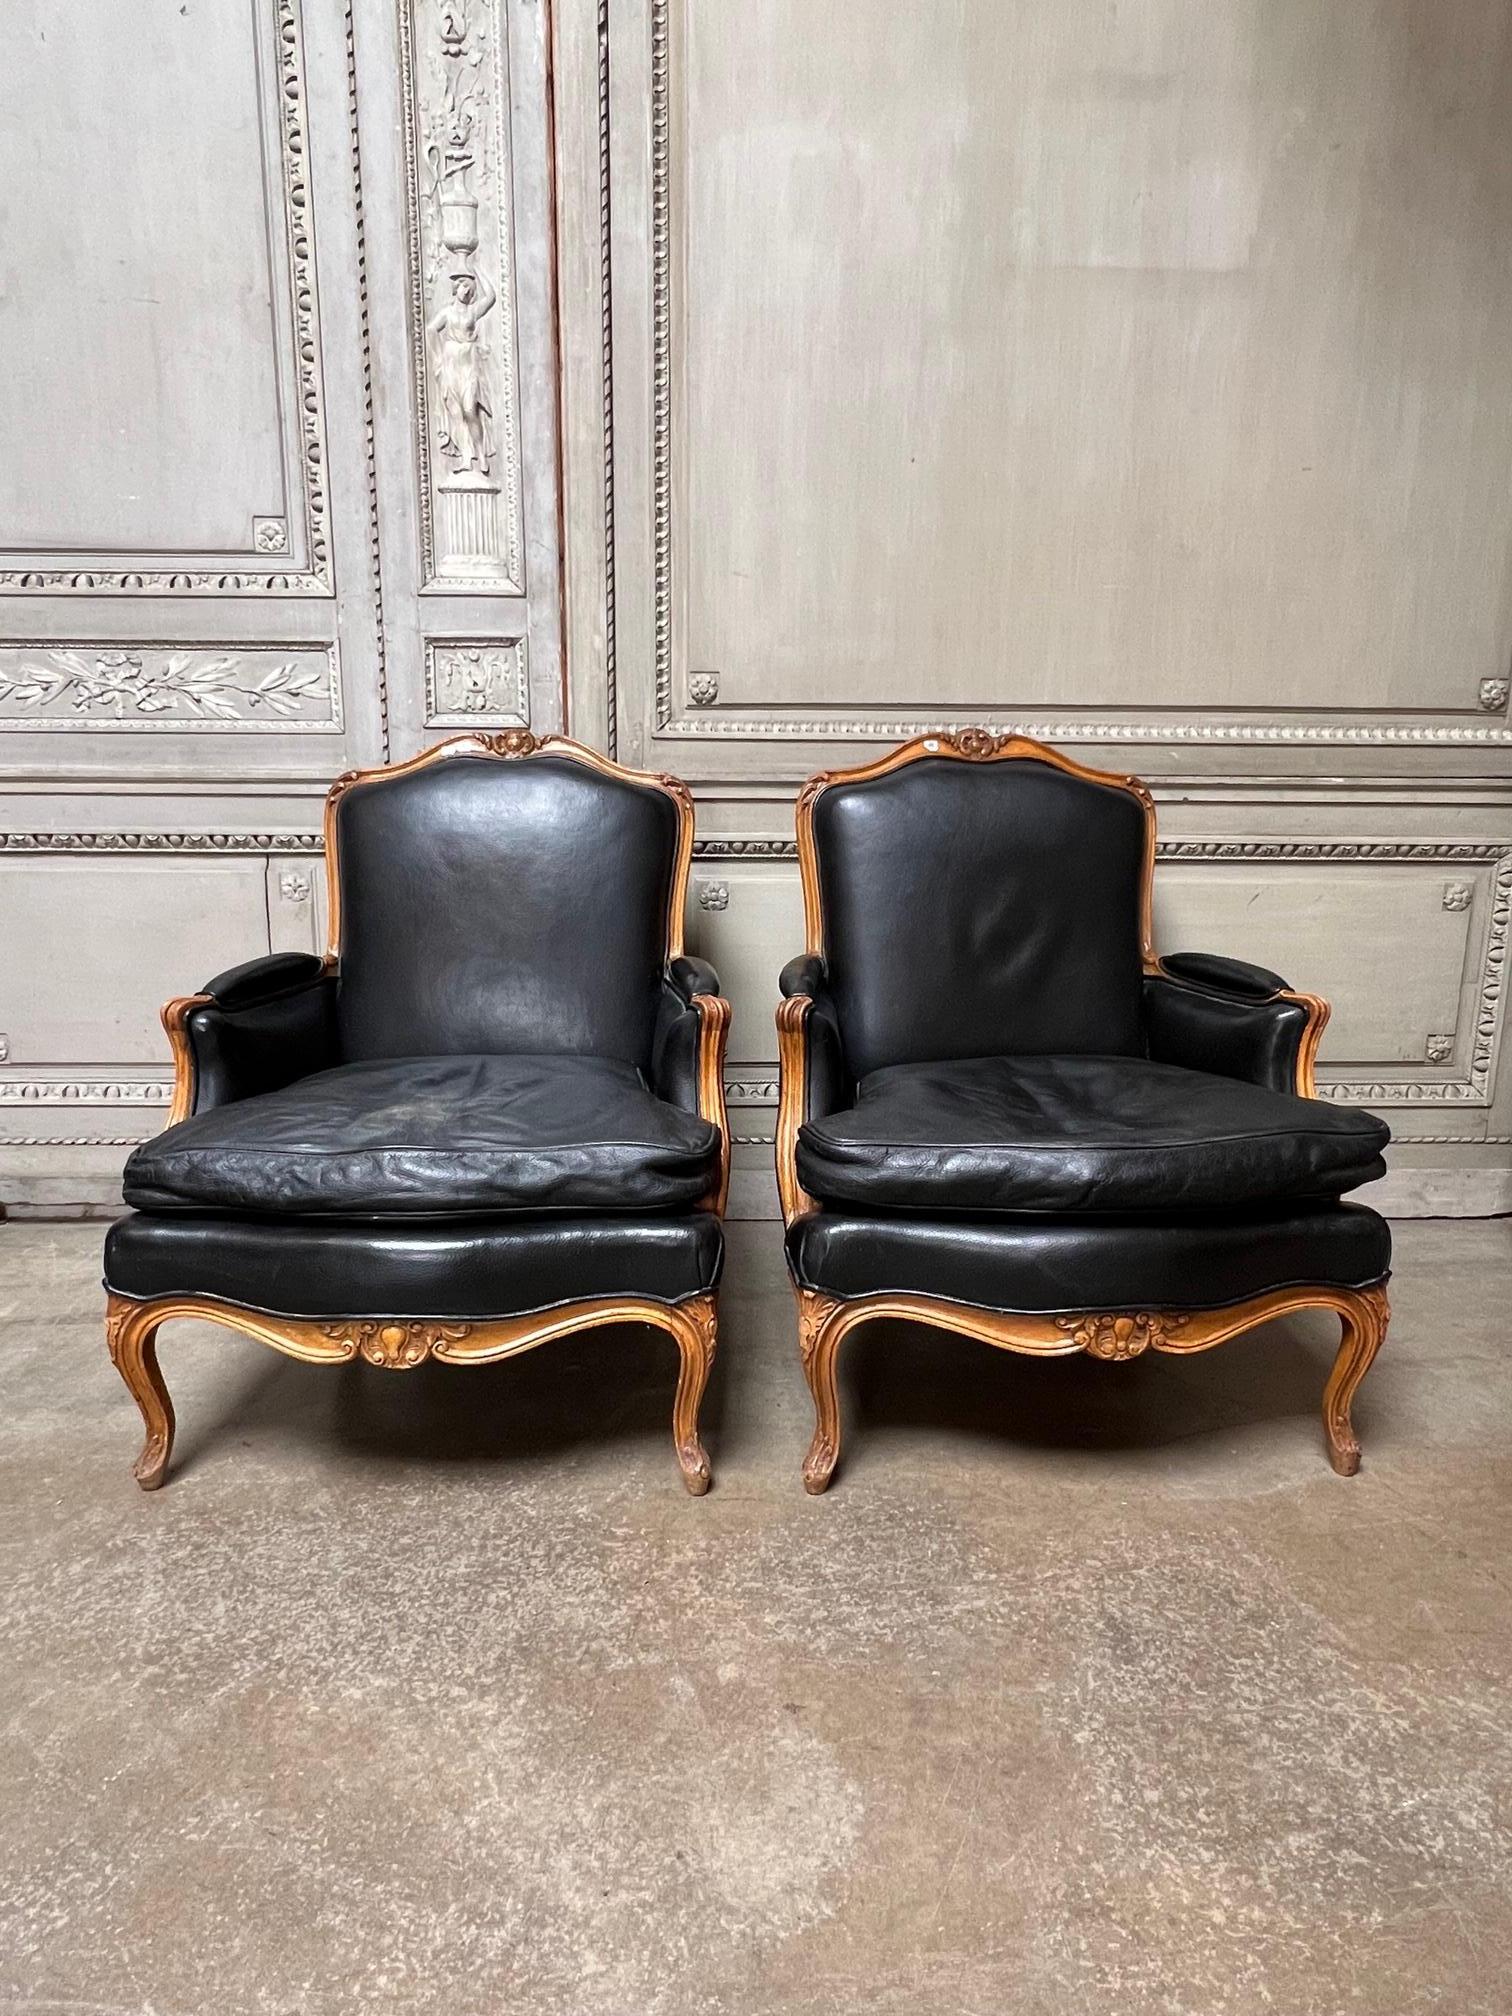 A large pair of French Louis XV style carved wood bergere armchairs with nice deep carving dating from the mid 20th century. These lounge chairs are currently covered in black leather but there is some wear on the seat cushions. they are usable but